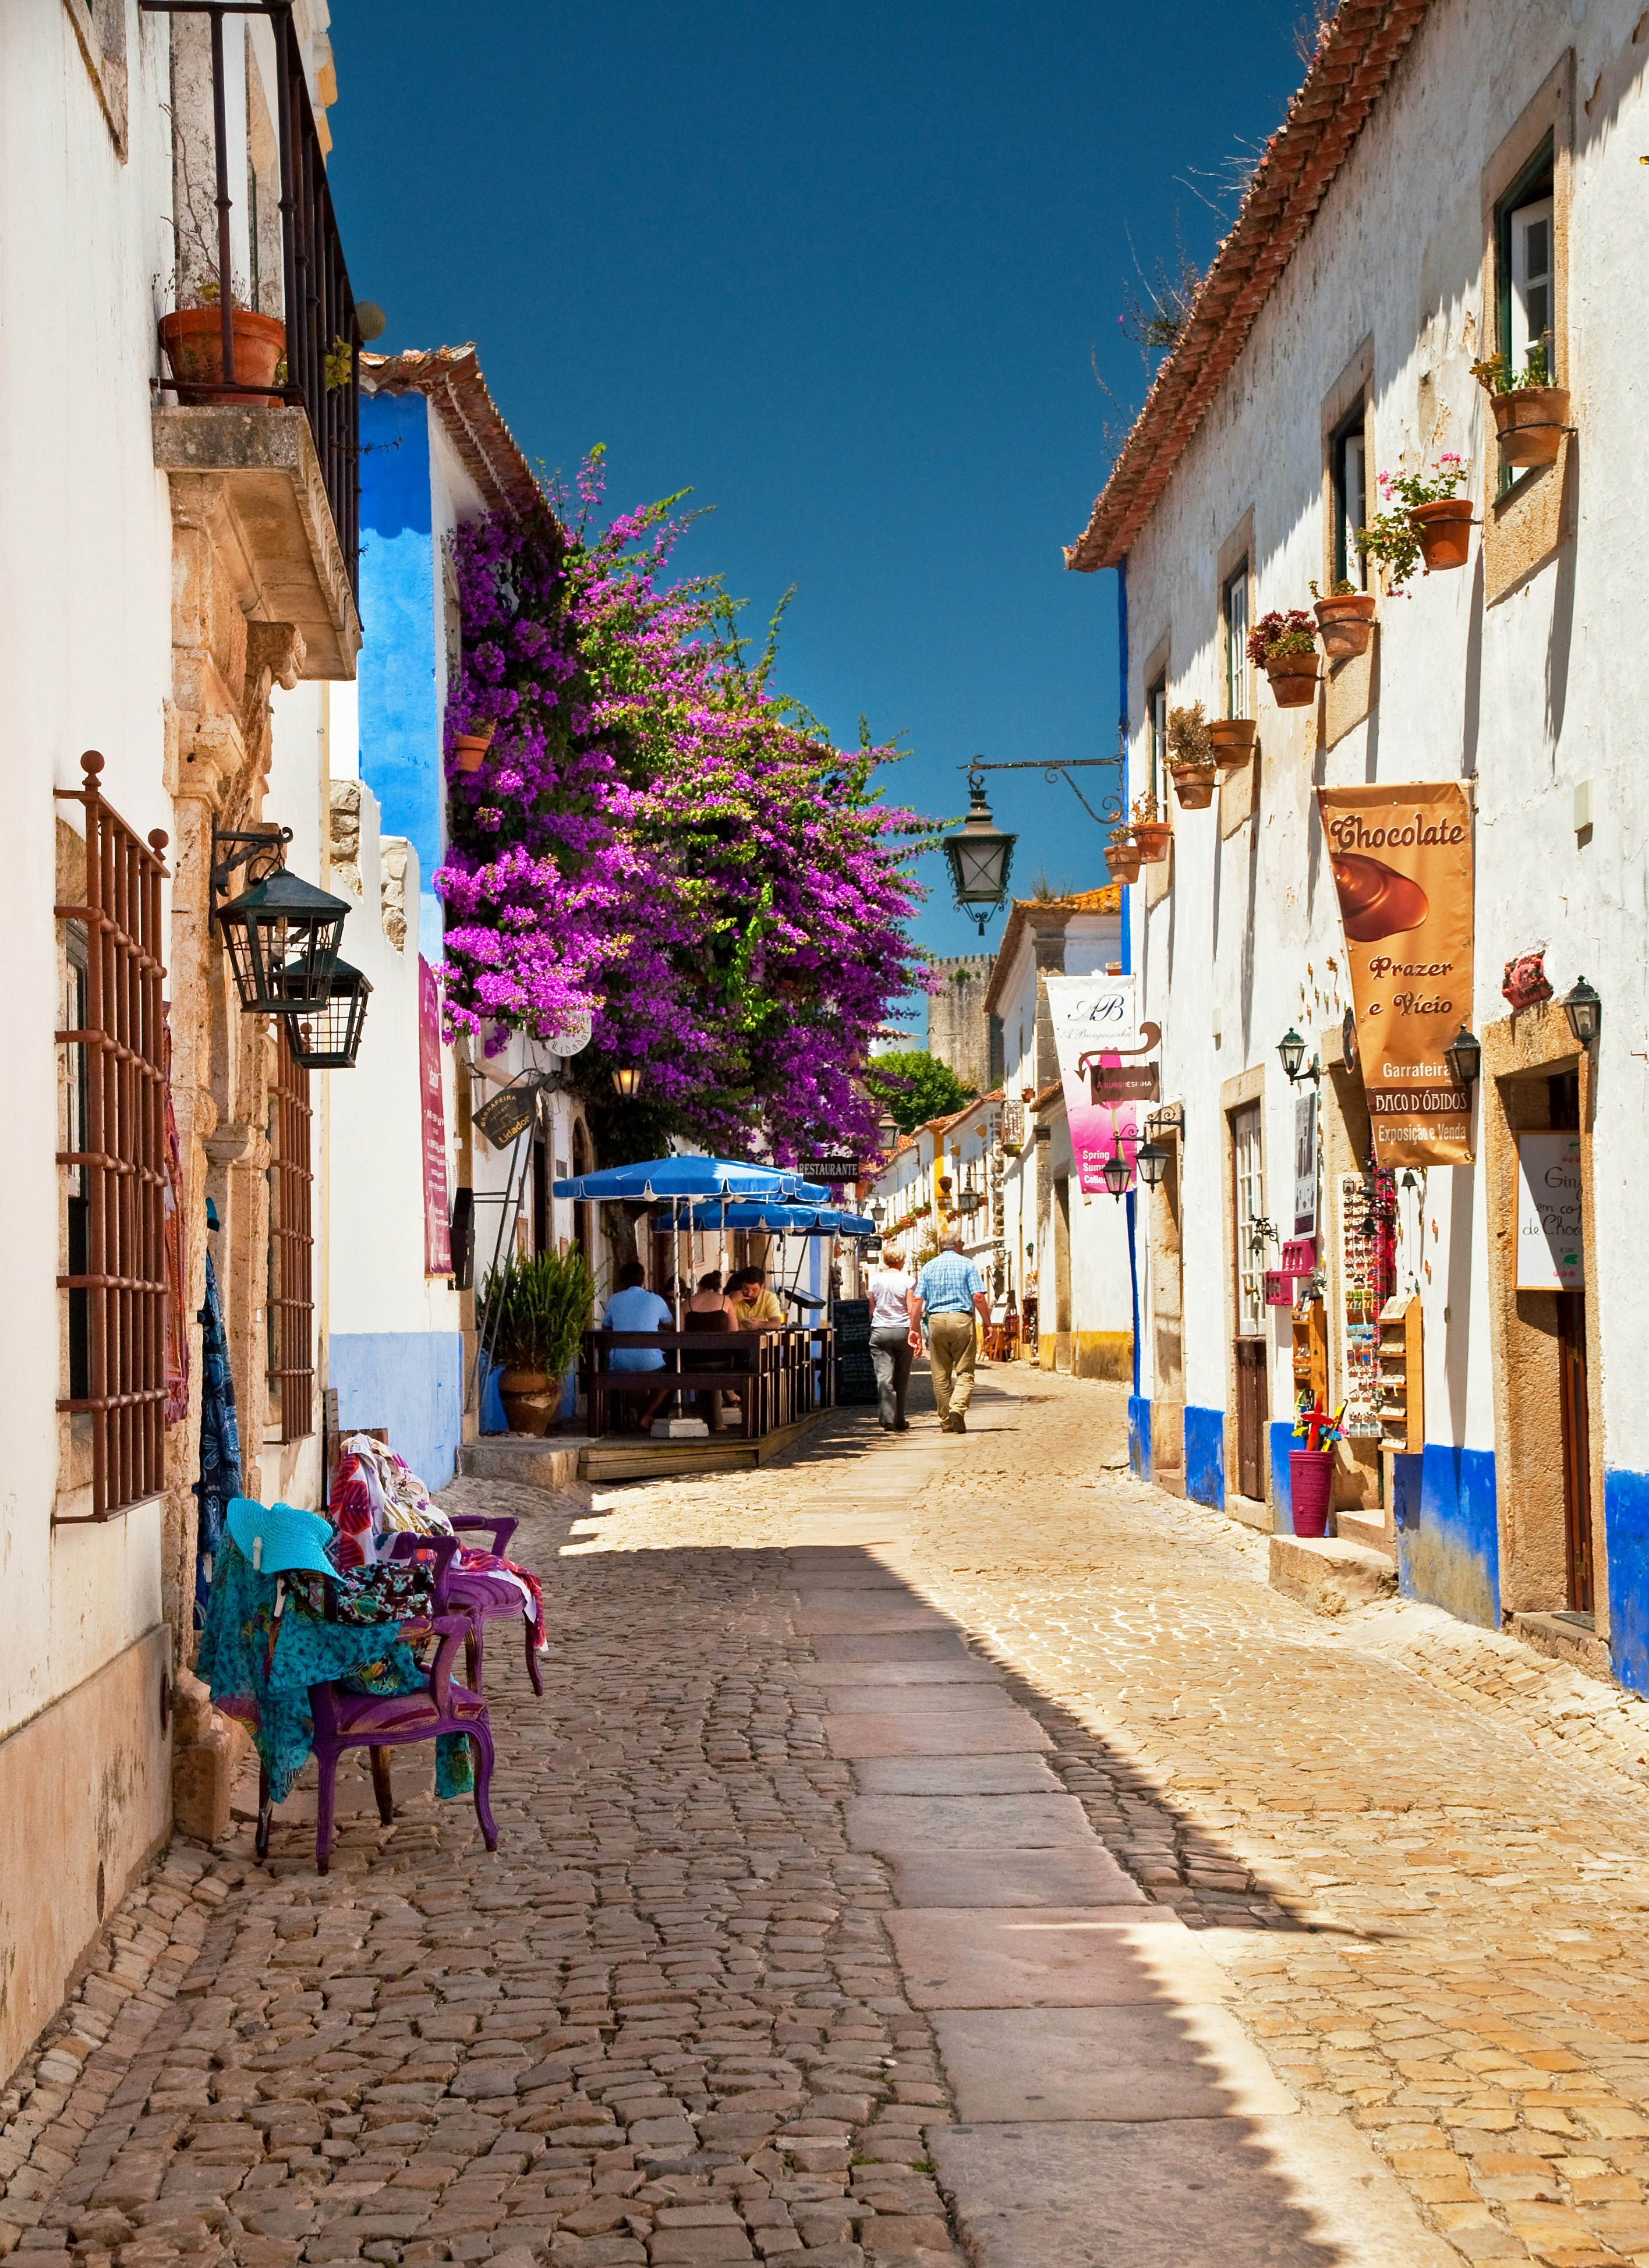 A picturesque, narrow street with sand-coloured cobblestones and whitewashed buildings on either side. Terracotta flowerpots adorn the windows, and bright purple bougainvillea is growing over the azure parasols of a cafe.